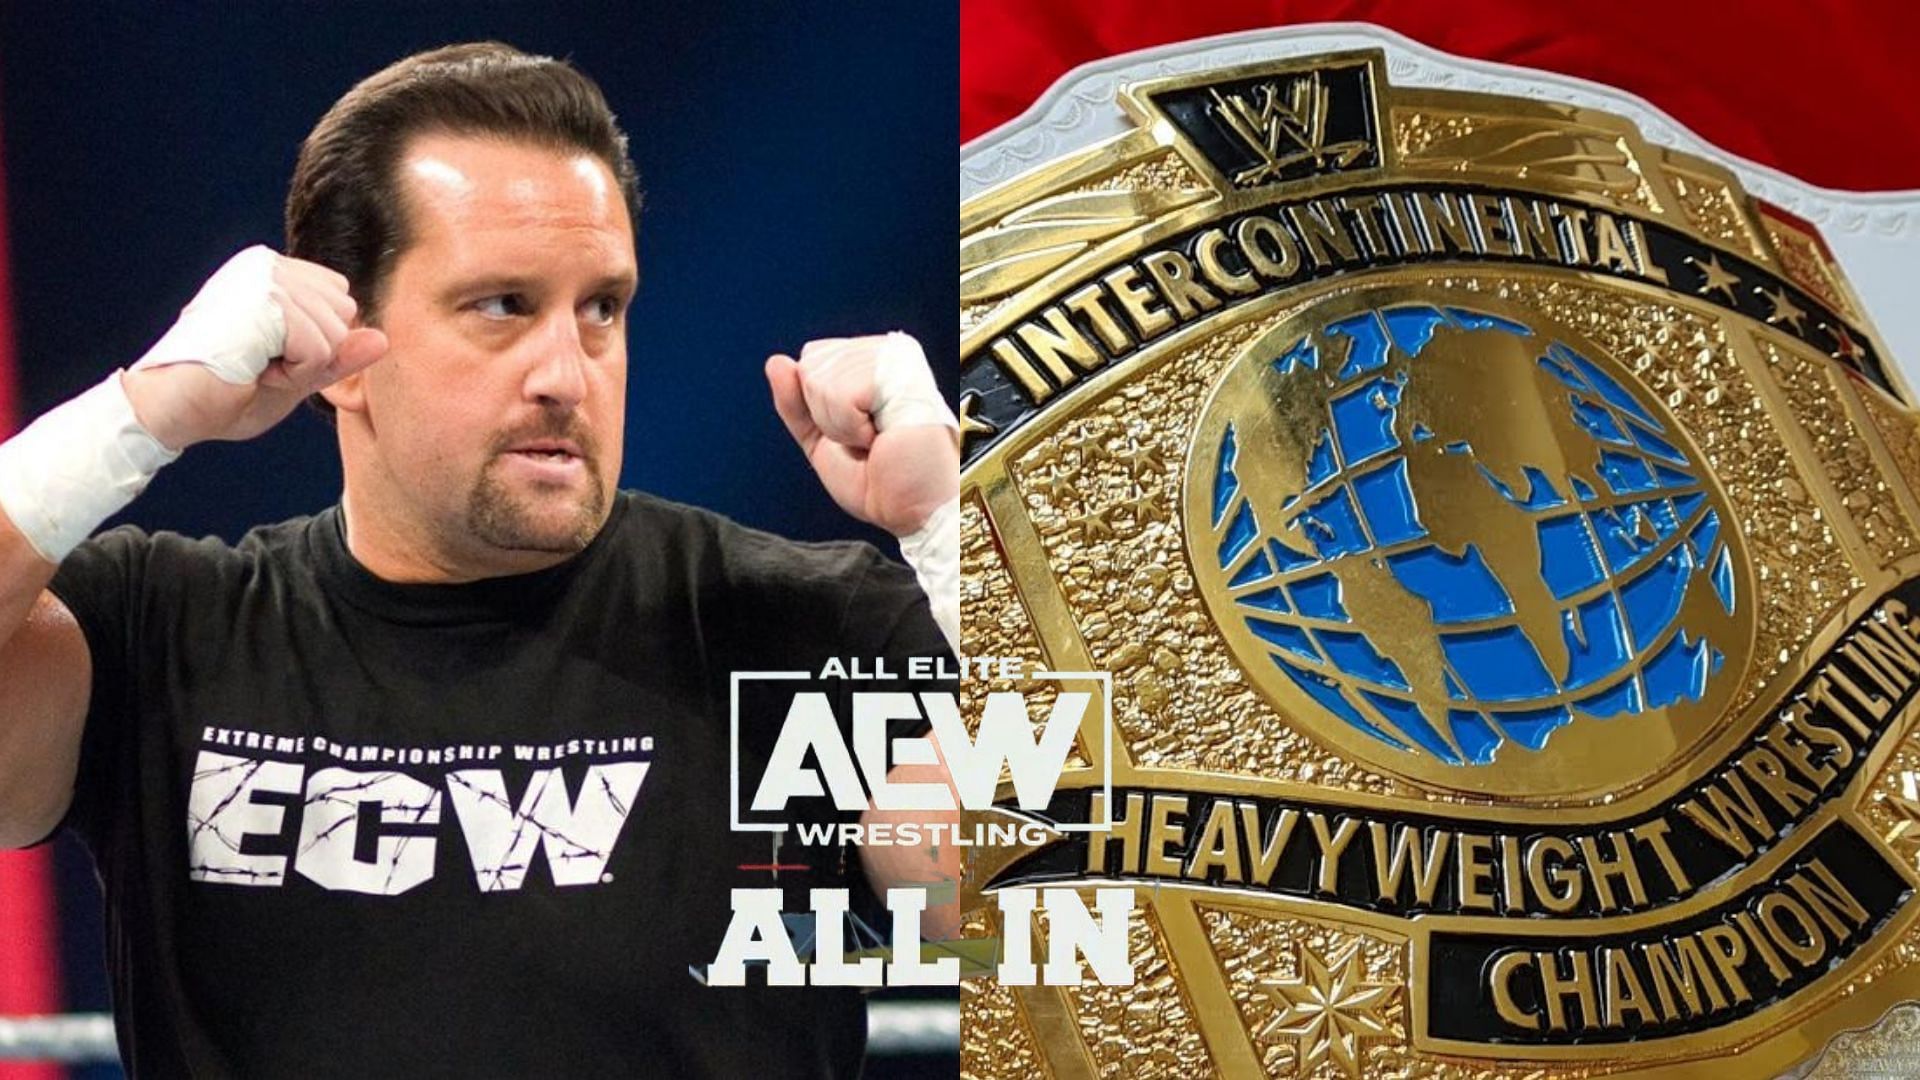 Tommy Dreamer is former ECW Champion